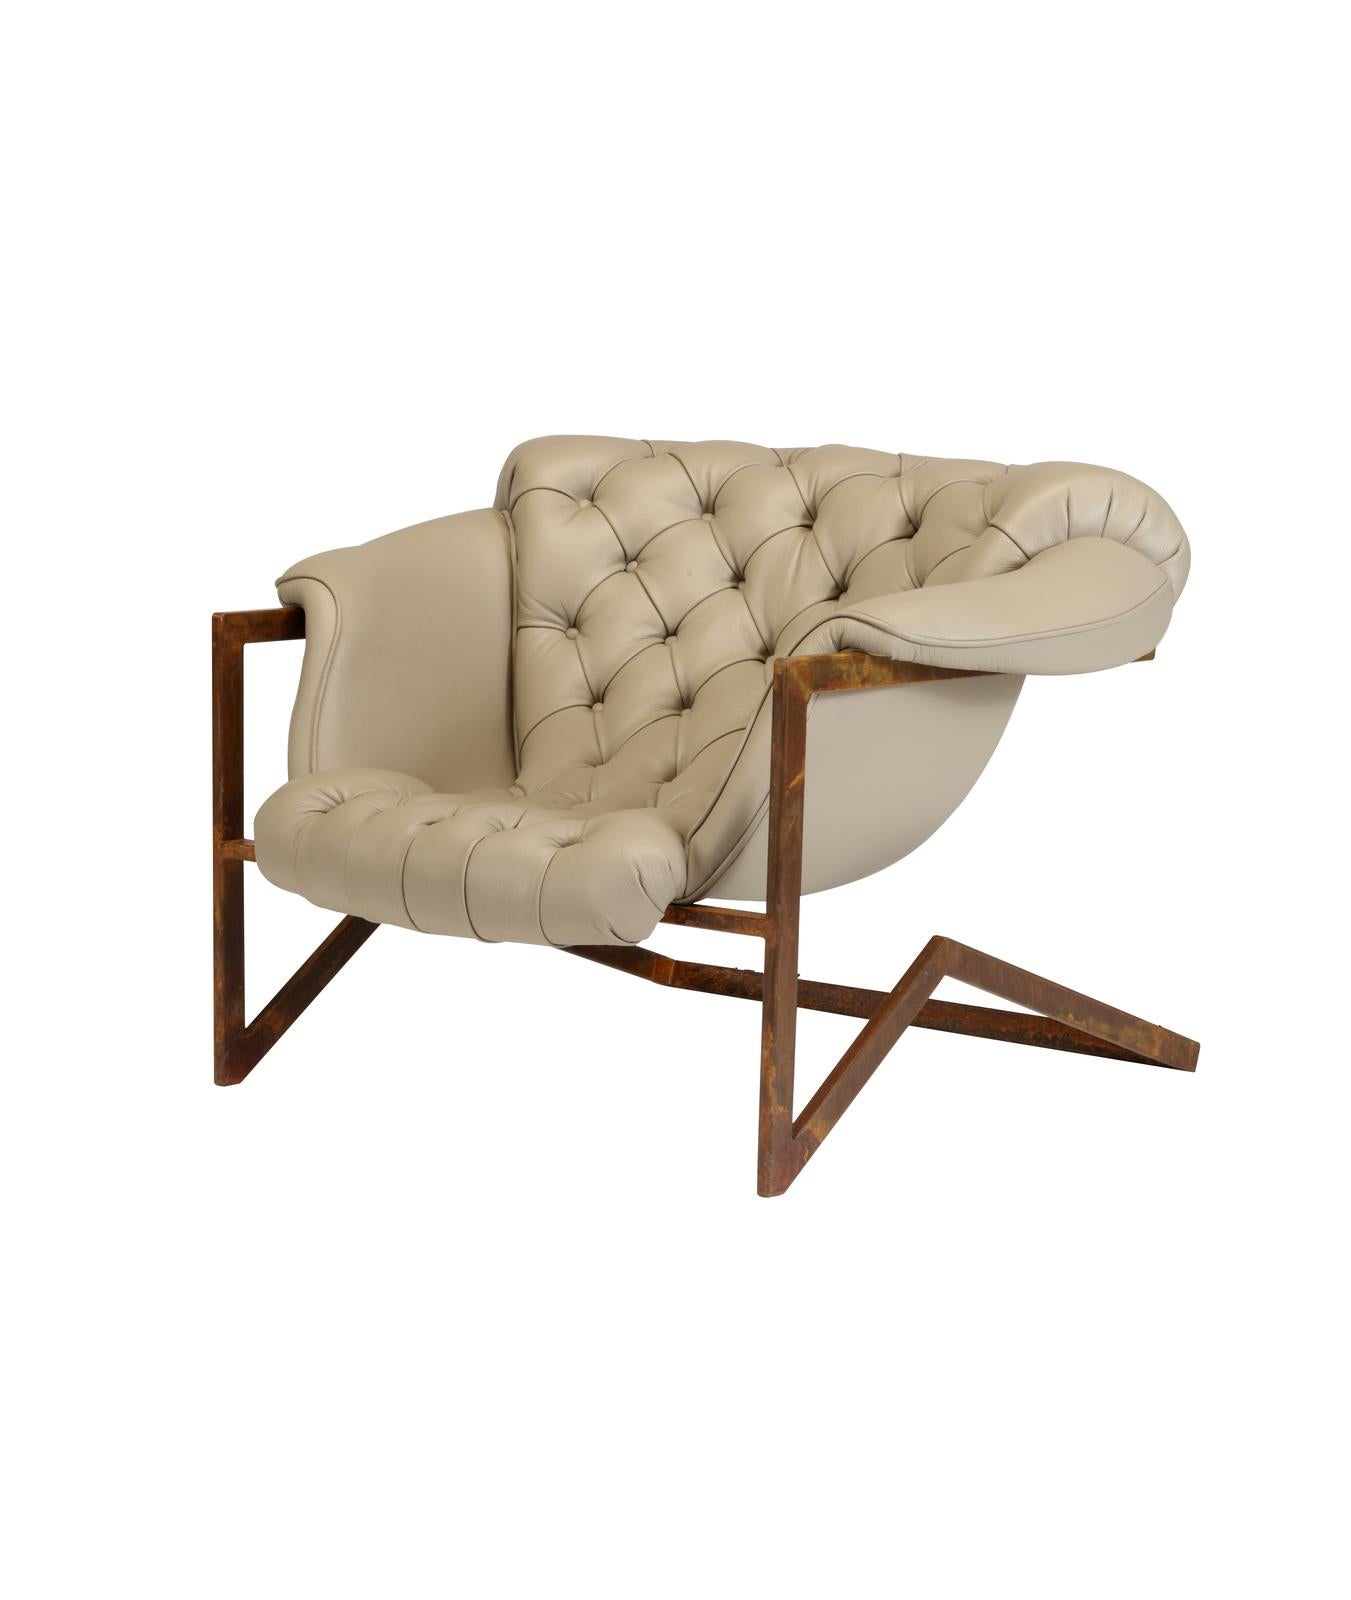 An elegant mix of materials and styles, this stunning armchair features a cantilever base made of iron with a brown 